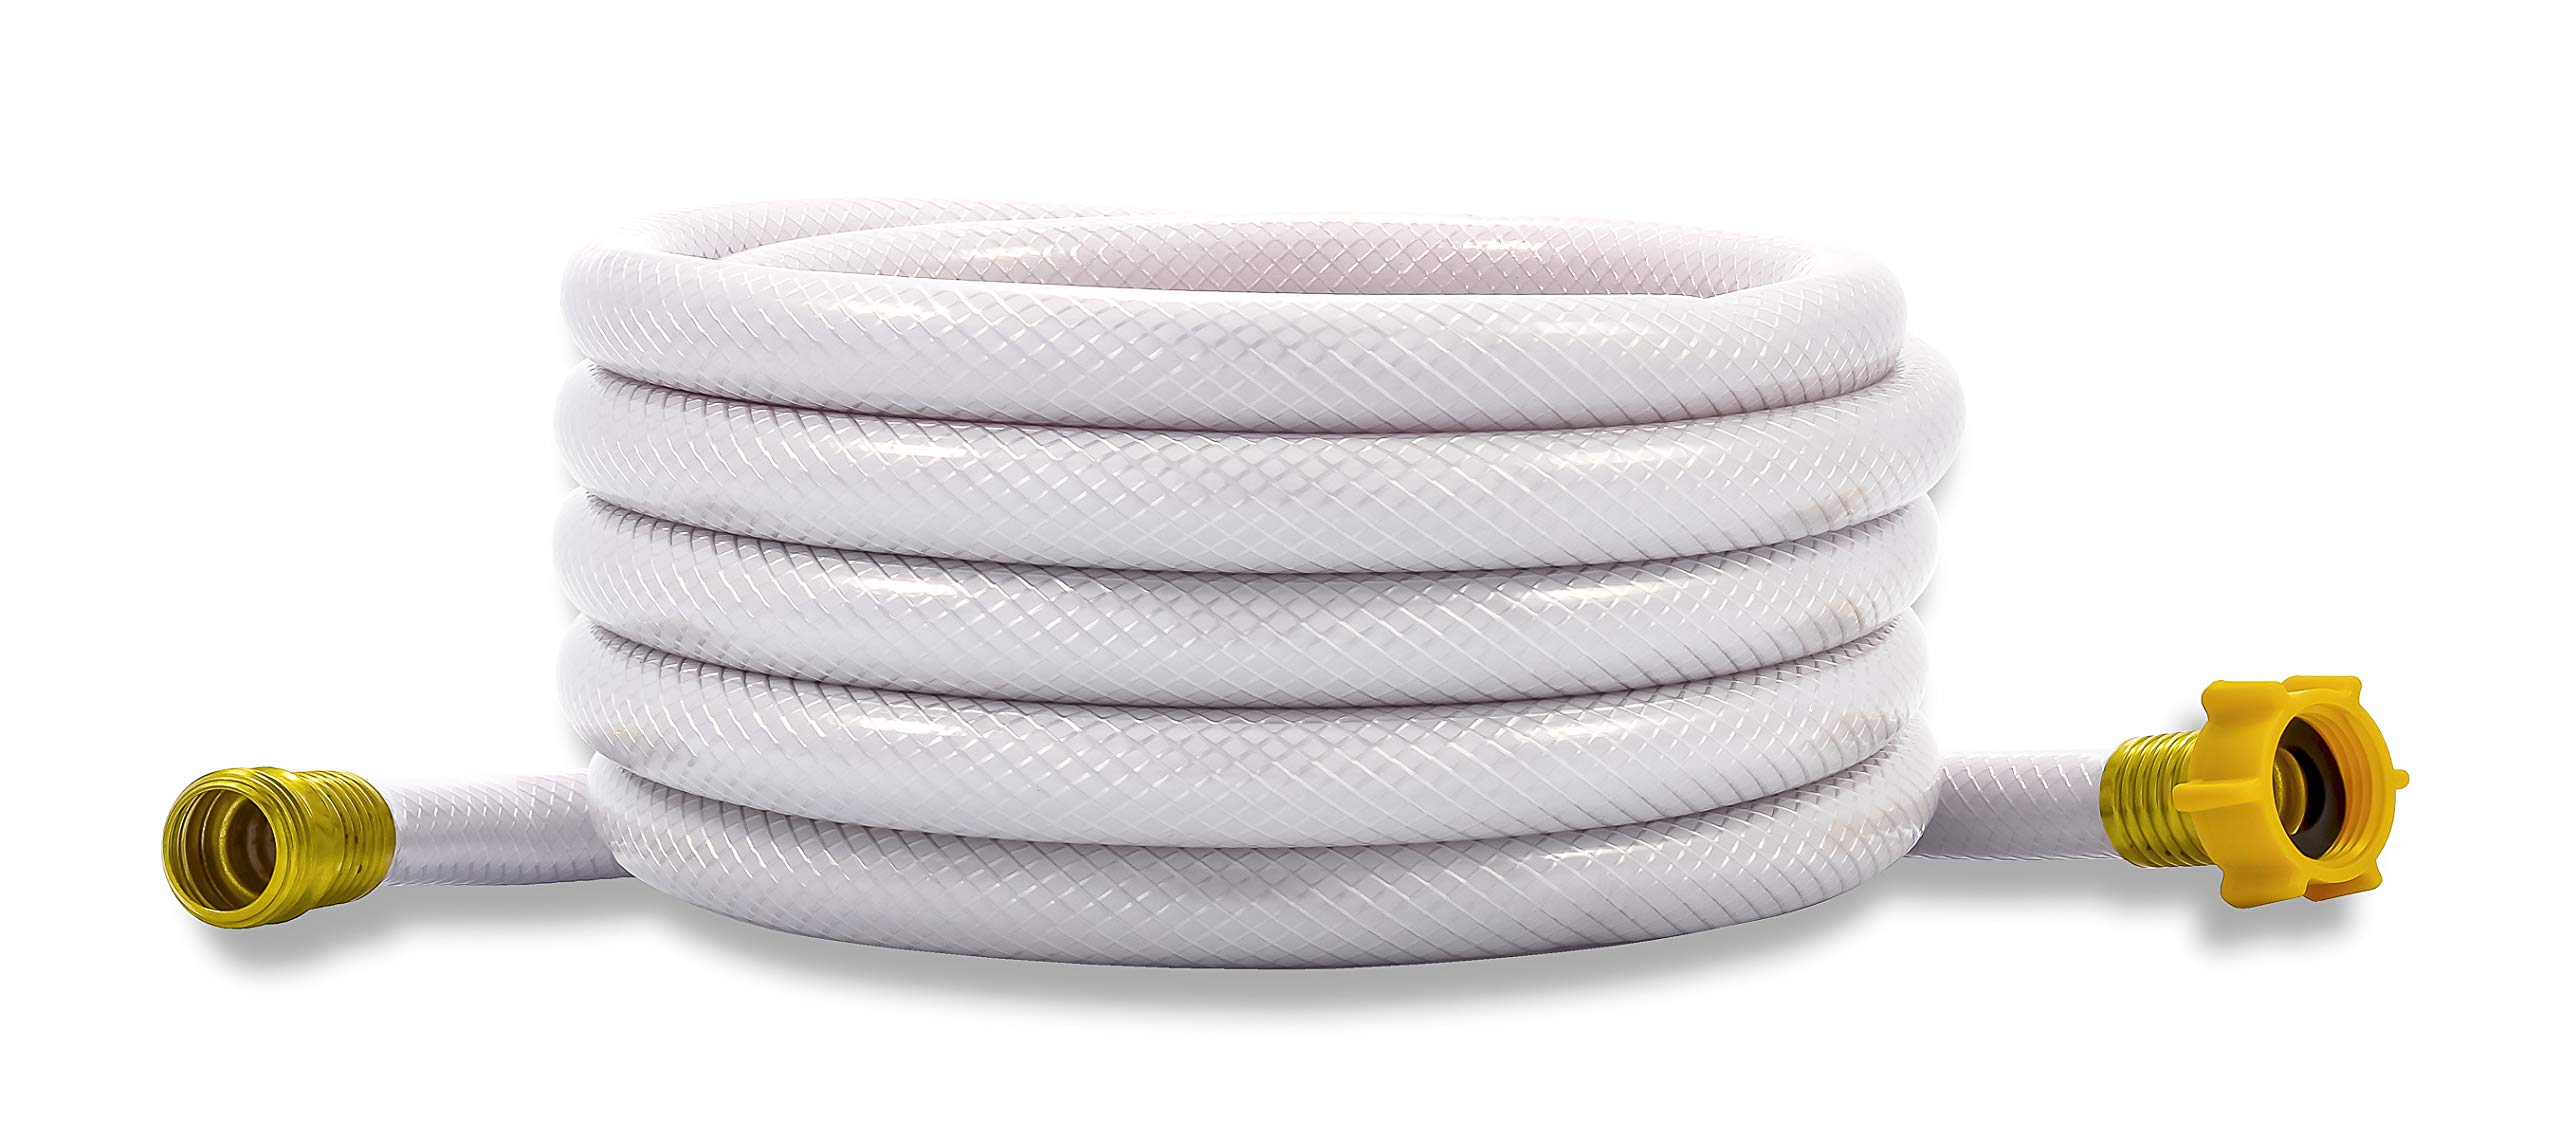 Camco TastePURE Drinking Water Hose for RV (White) $12.50 + Free Shipping w/ Prime or on $25+